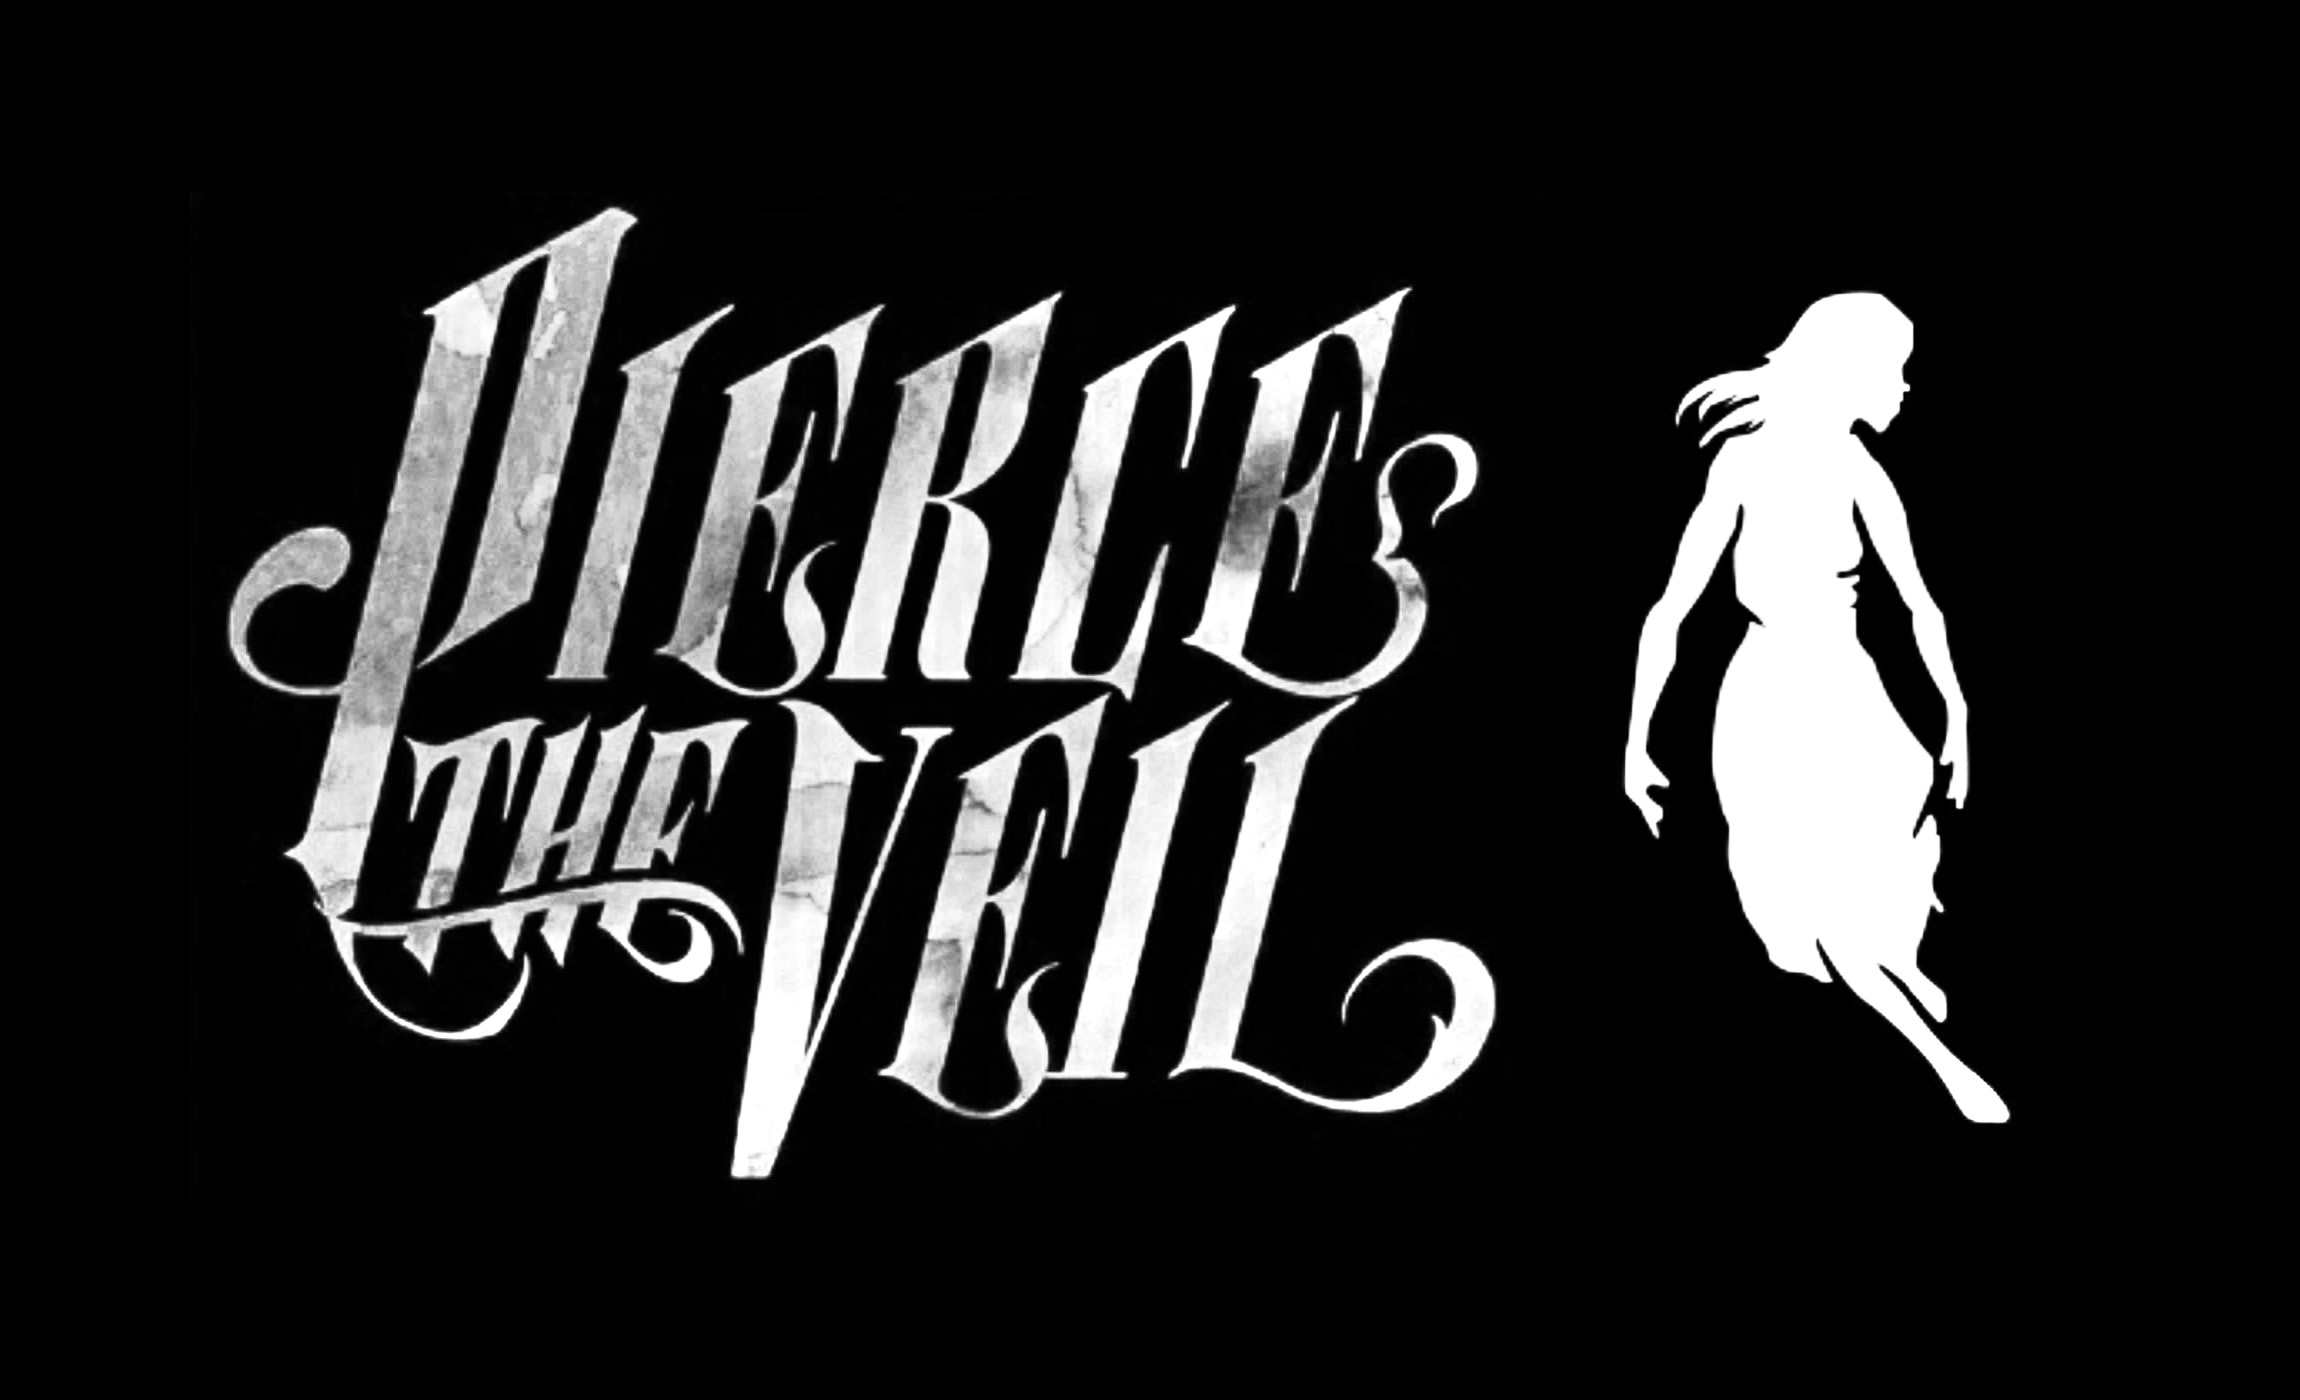 The Pierce the Veil wordmark that appeared on the cover of the 'Selfis...